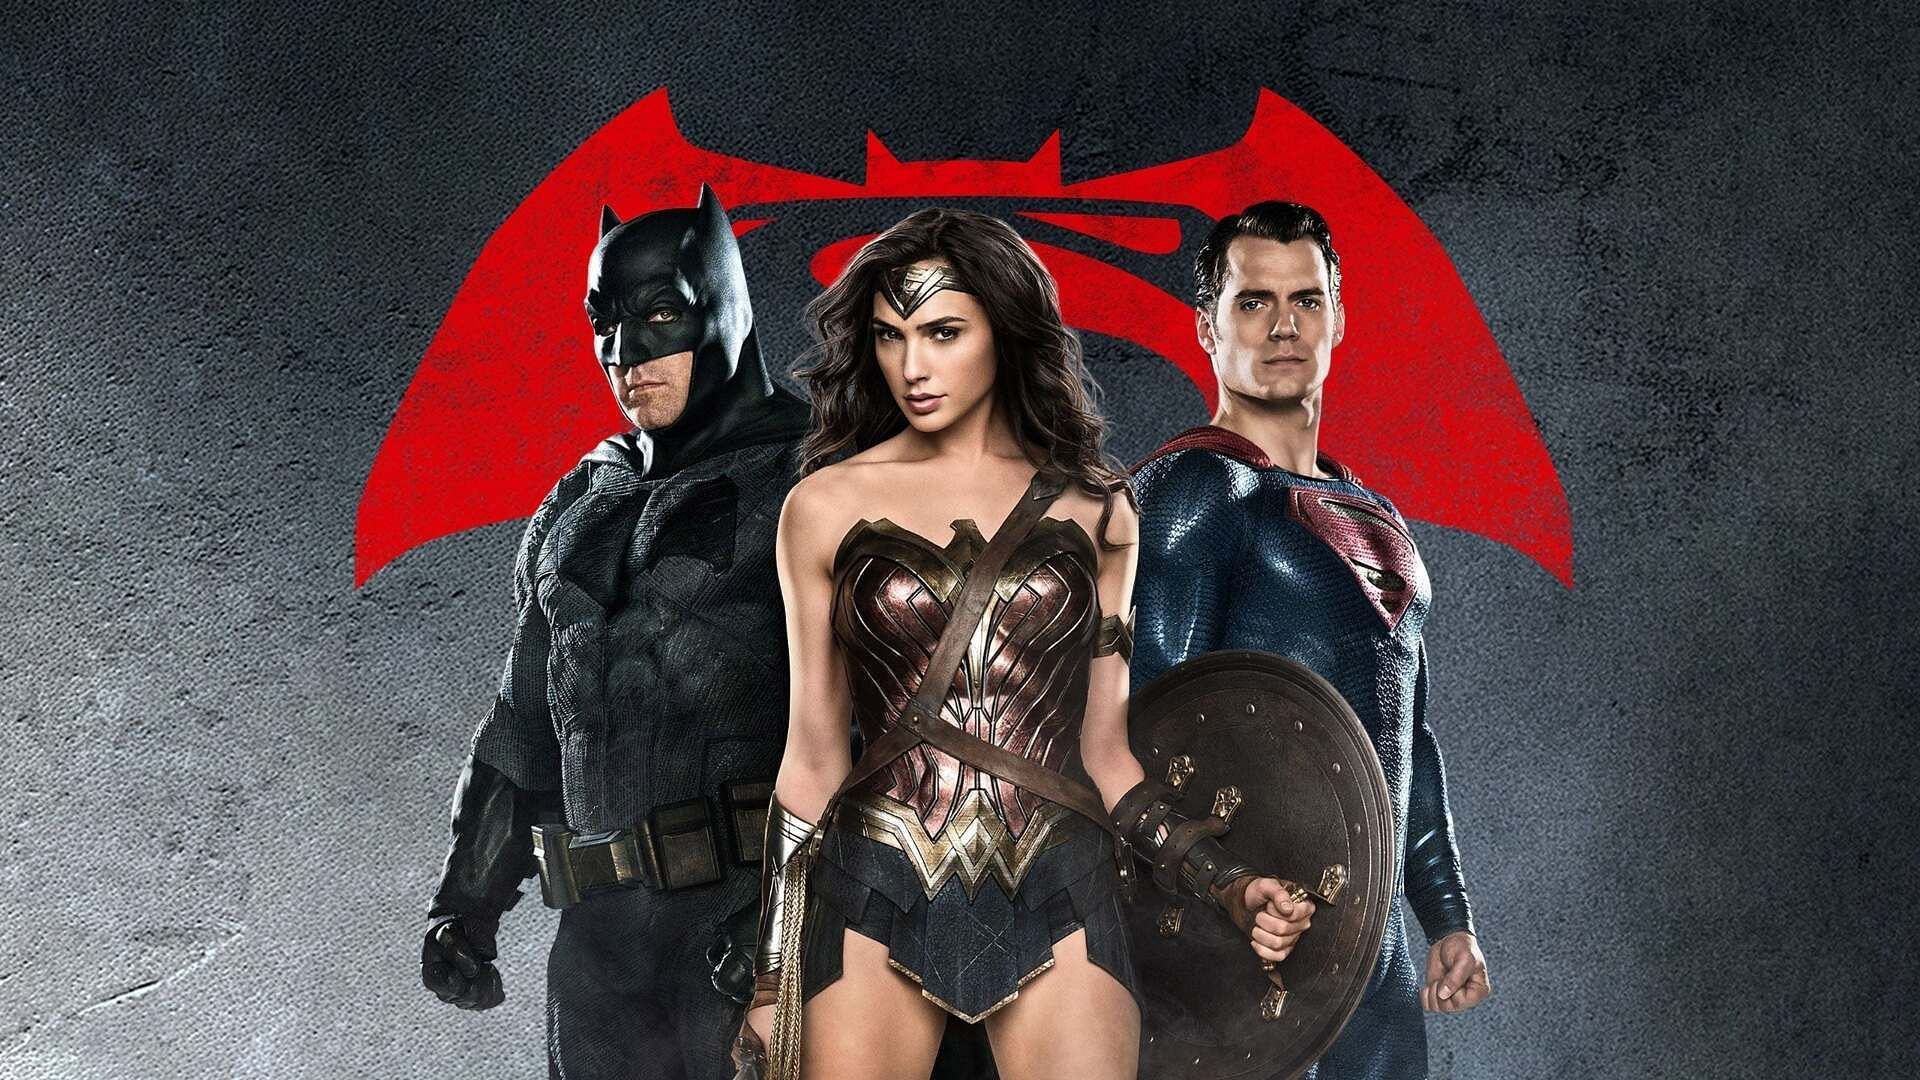 Batman v Superman: Dawn of Justice - Ultimate Edition streaming guide (Image via WB Pictures/DC)